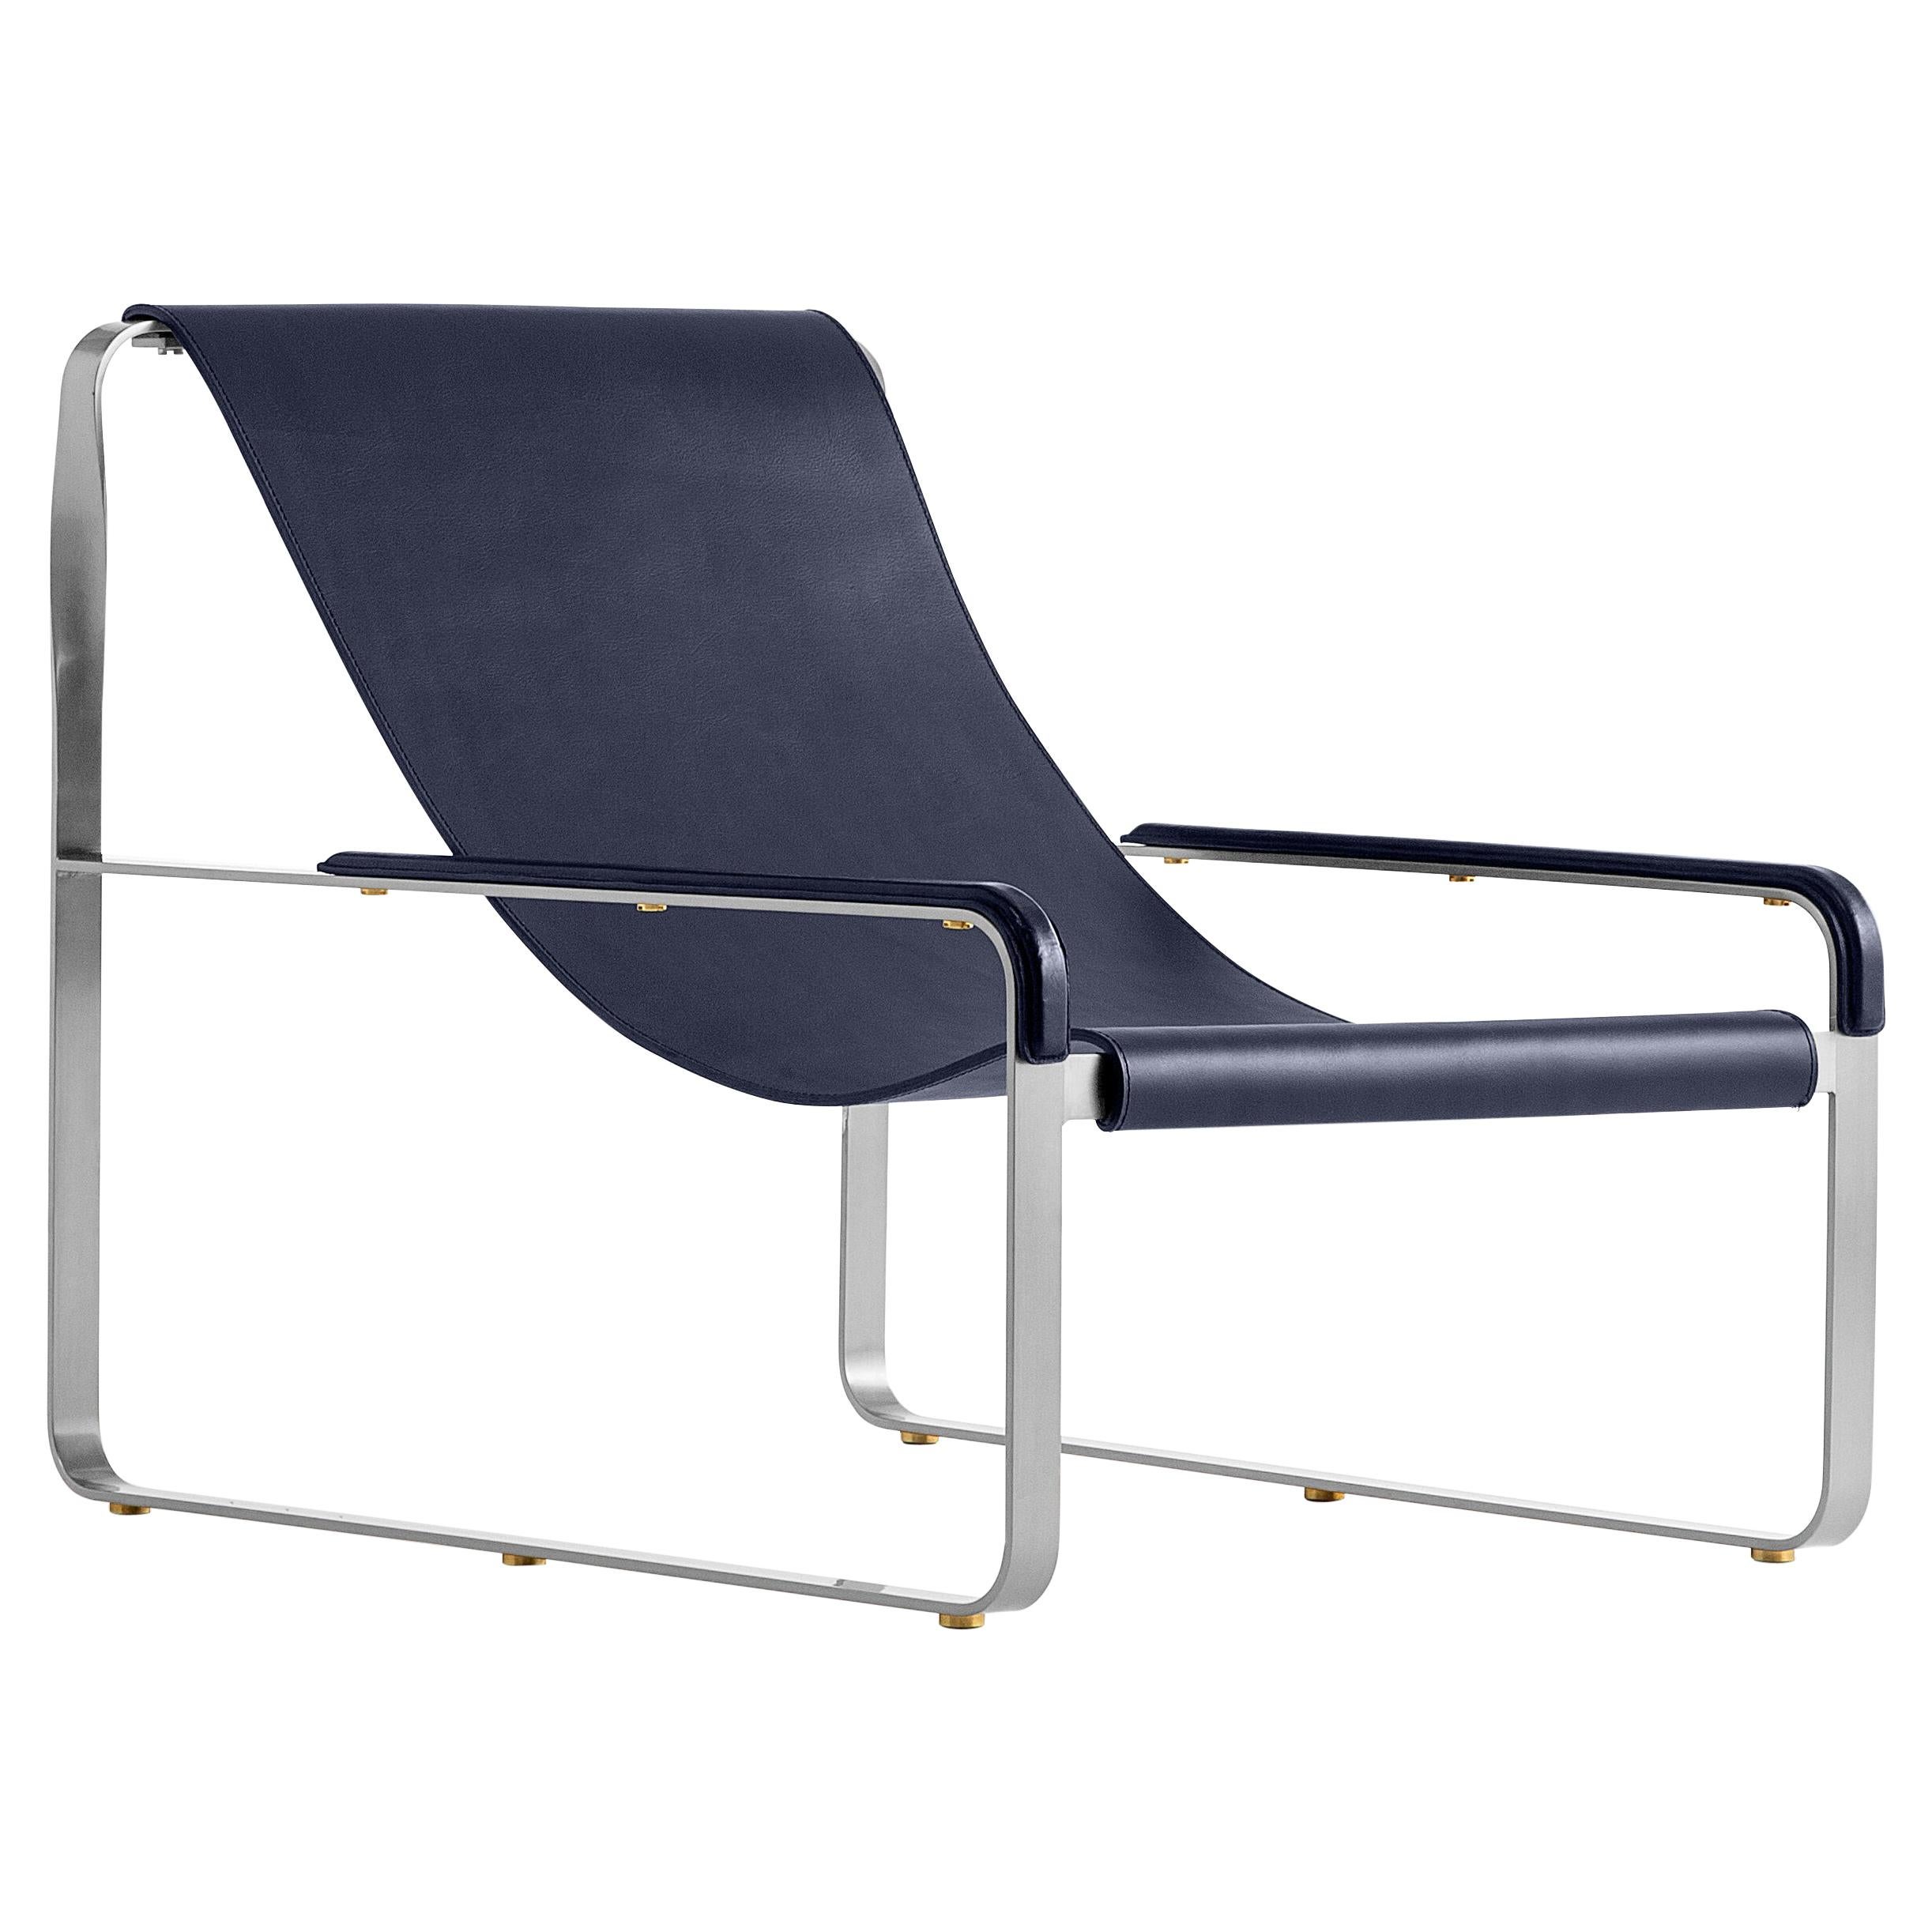 Handmade Classic Contemporary Chaise Lounge Old Silver Metal & Navy Blue Leather For Sale